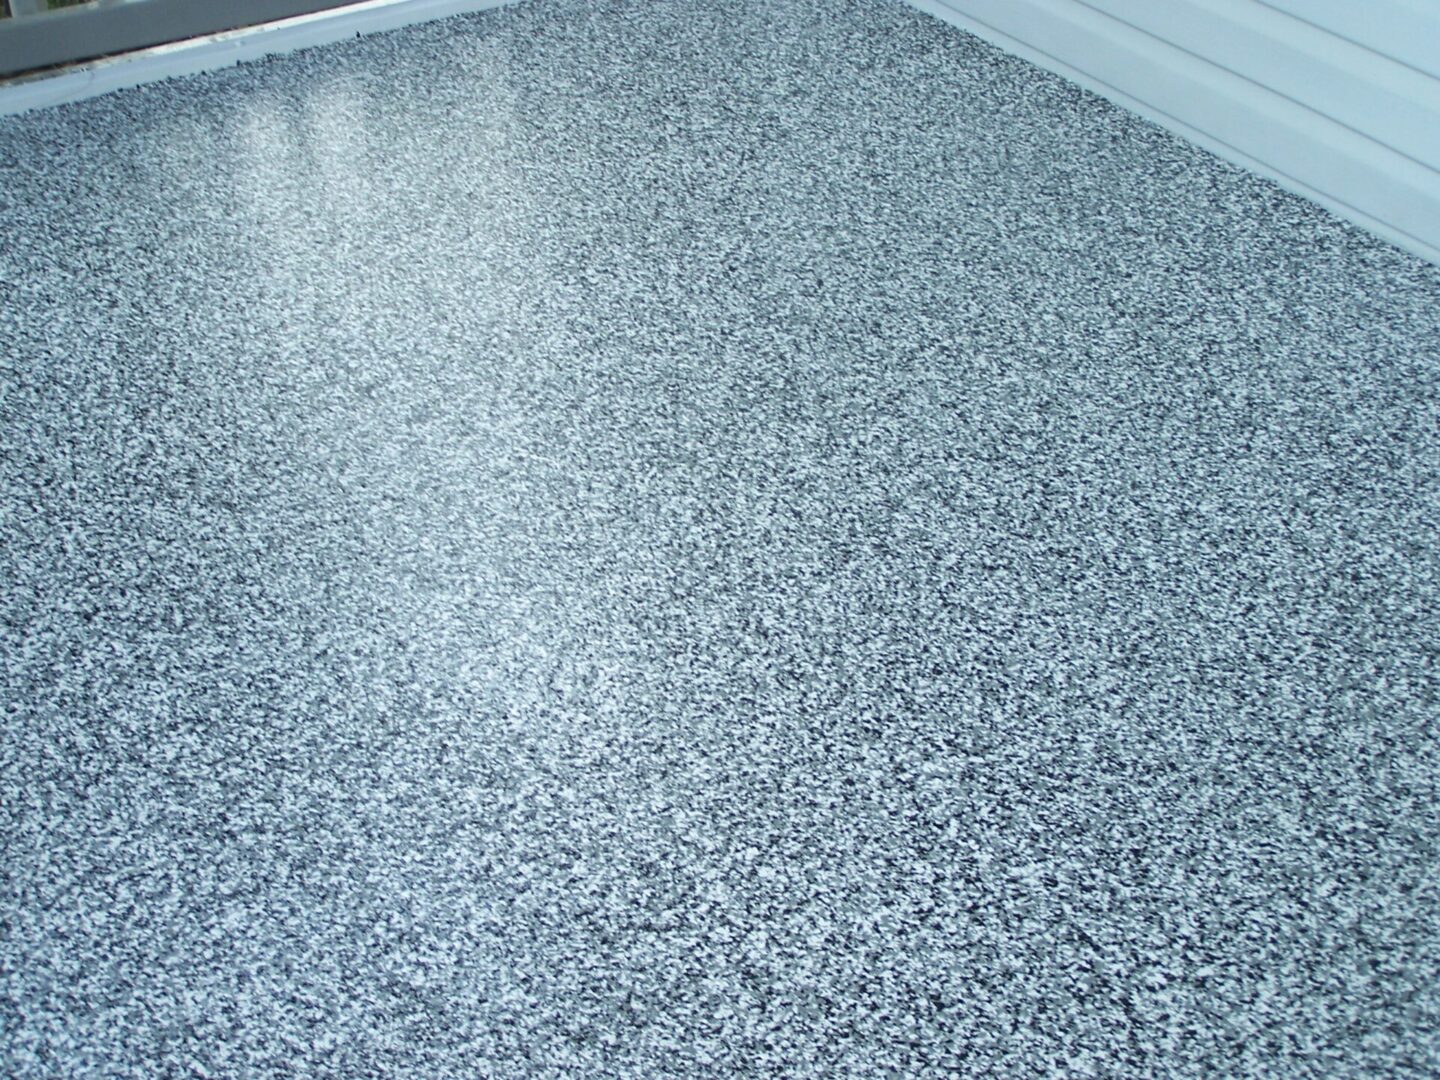 polyaspartic floor with gray flakes